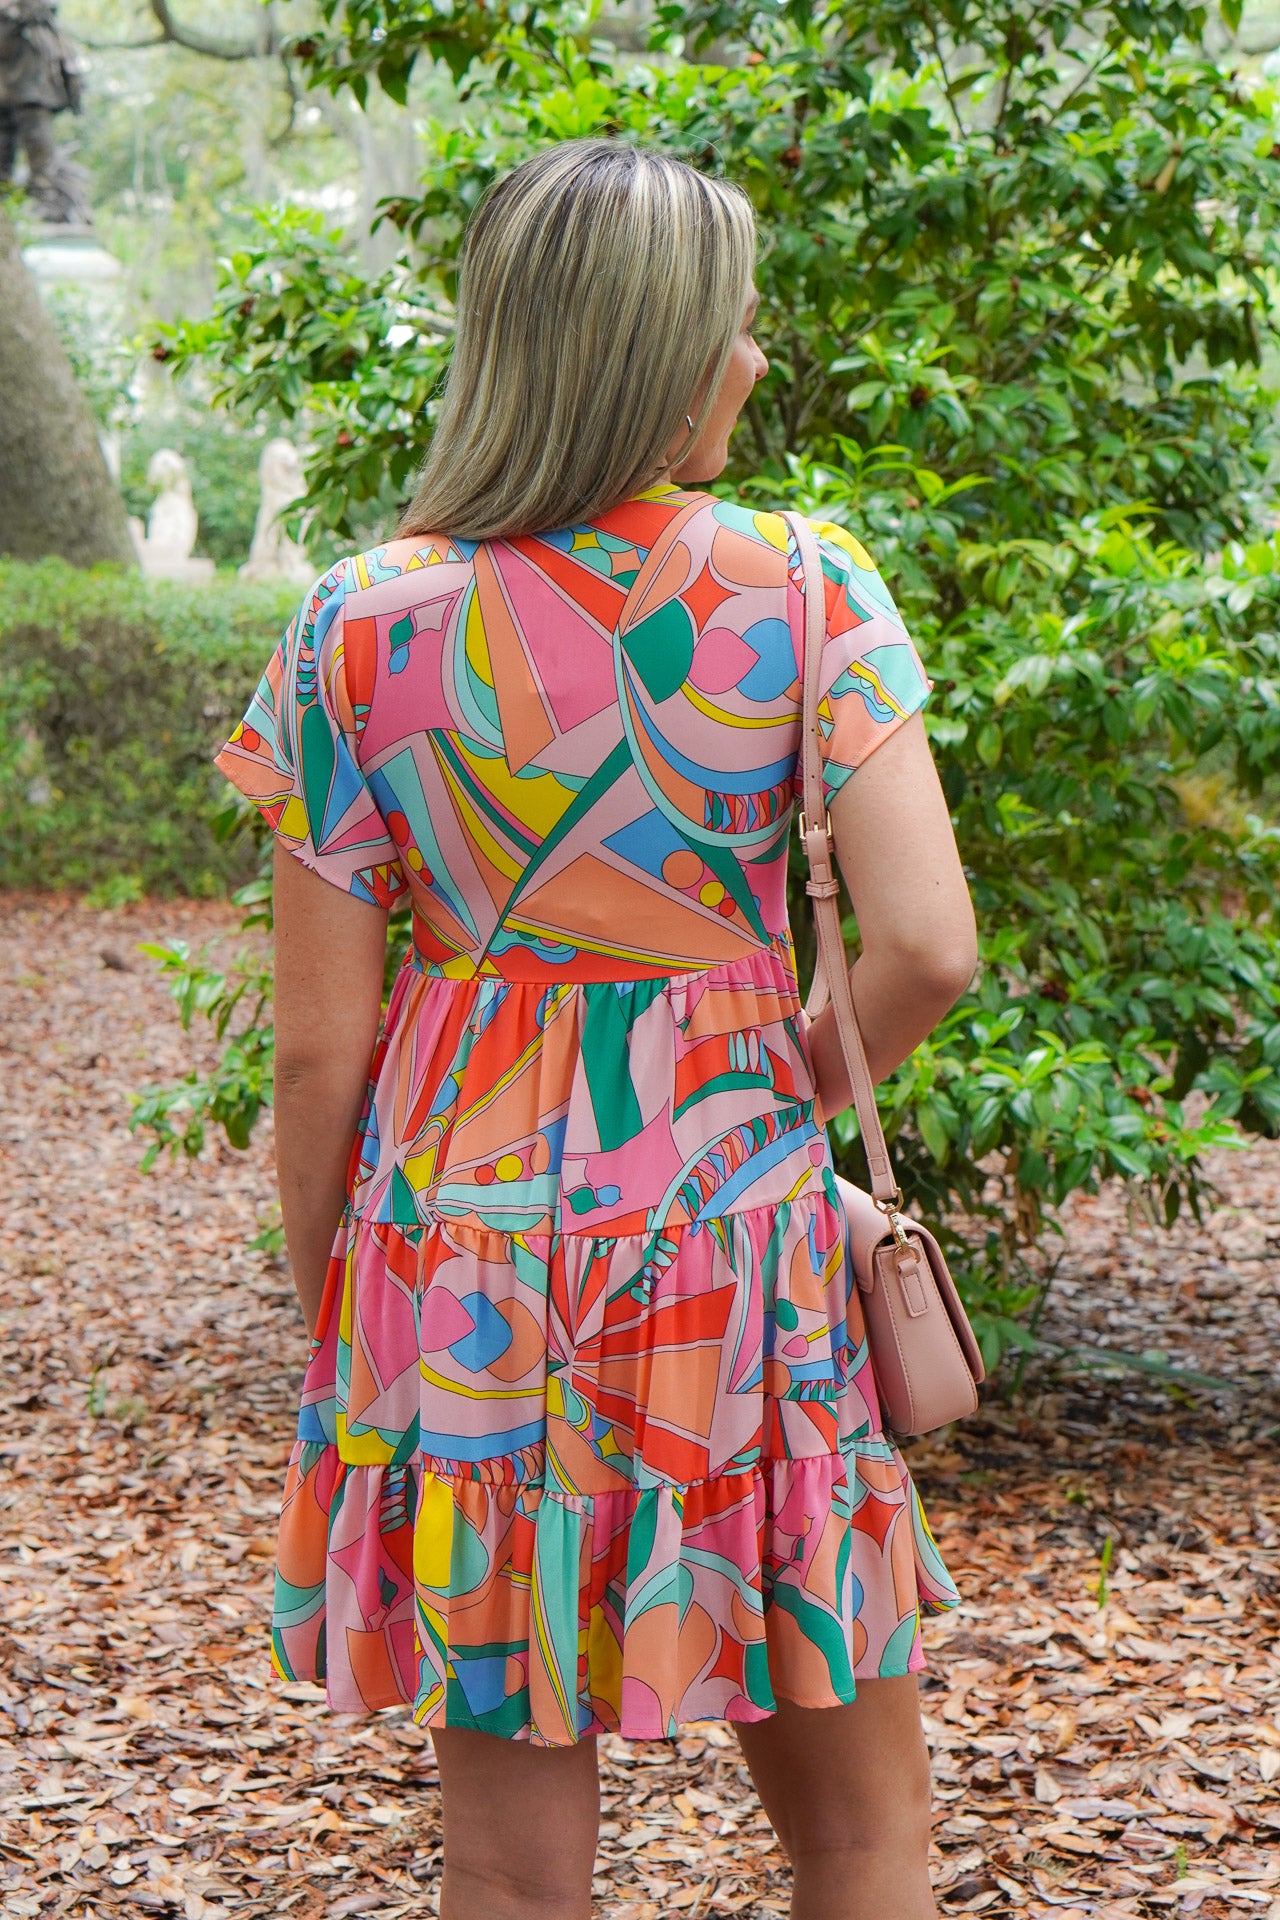 Model is wearing a multi colored mini dress with white sandals and a pink purse in front of greenery